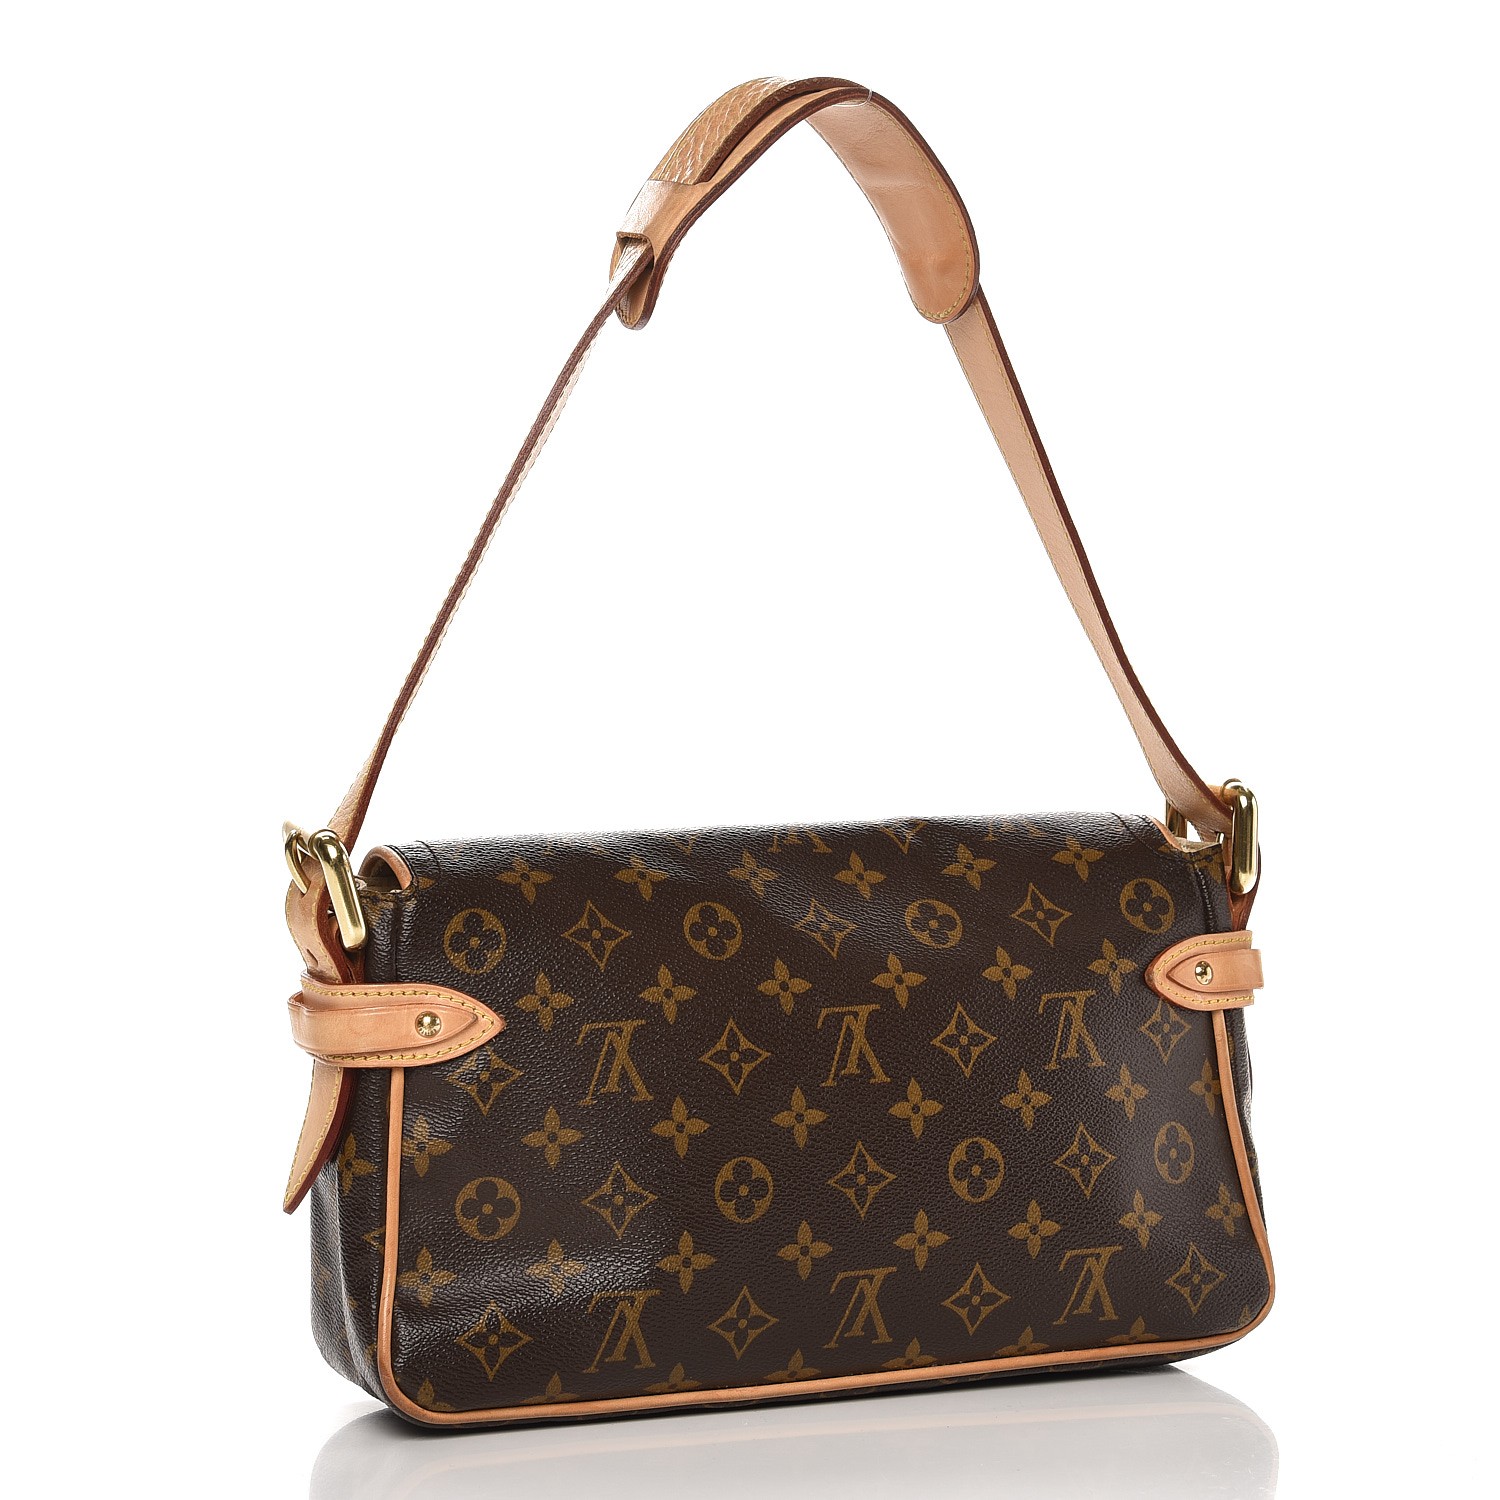 FASHIONPHILE UNBOXING, PREOWNED LOUIS VUITTON